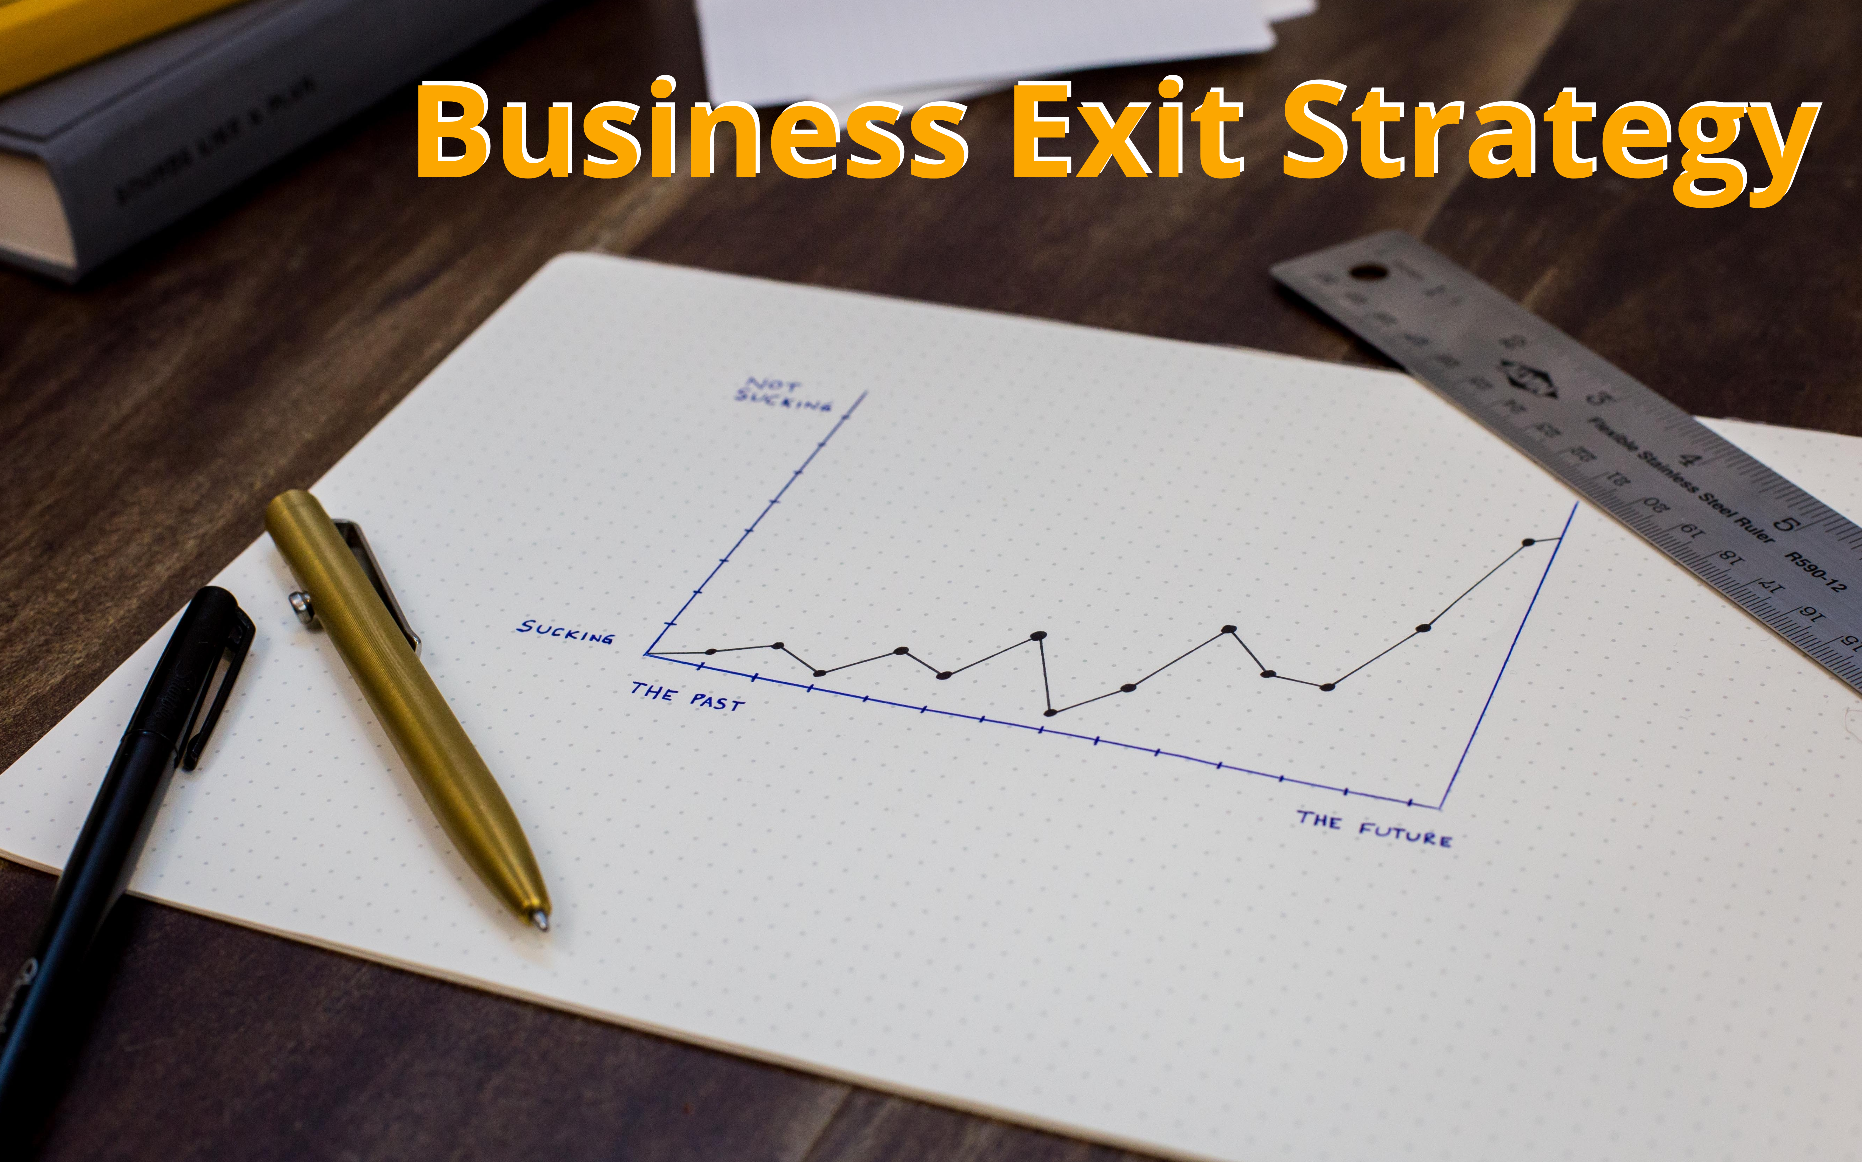 What is a Business Exit Strategy? Some of the Top Business Exit Strategies